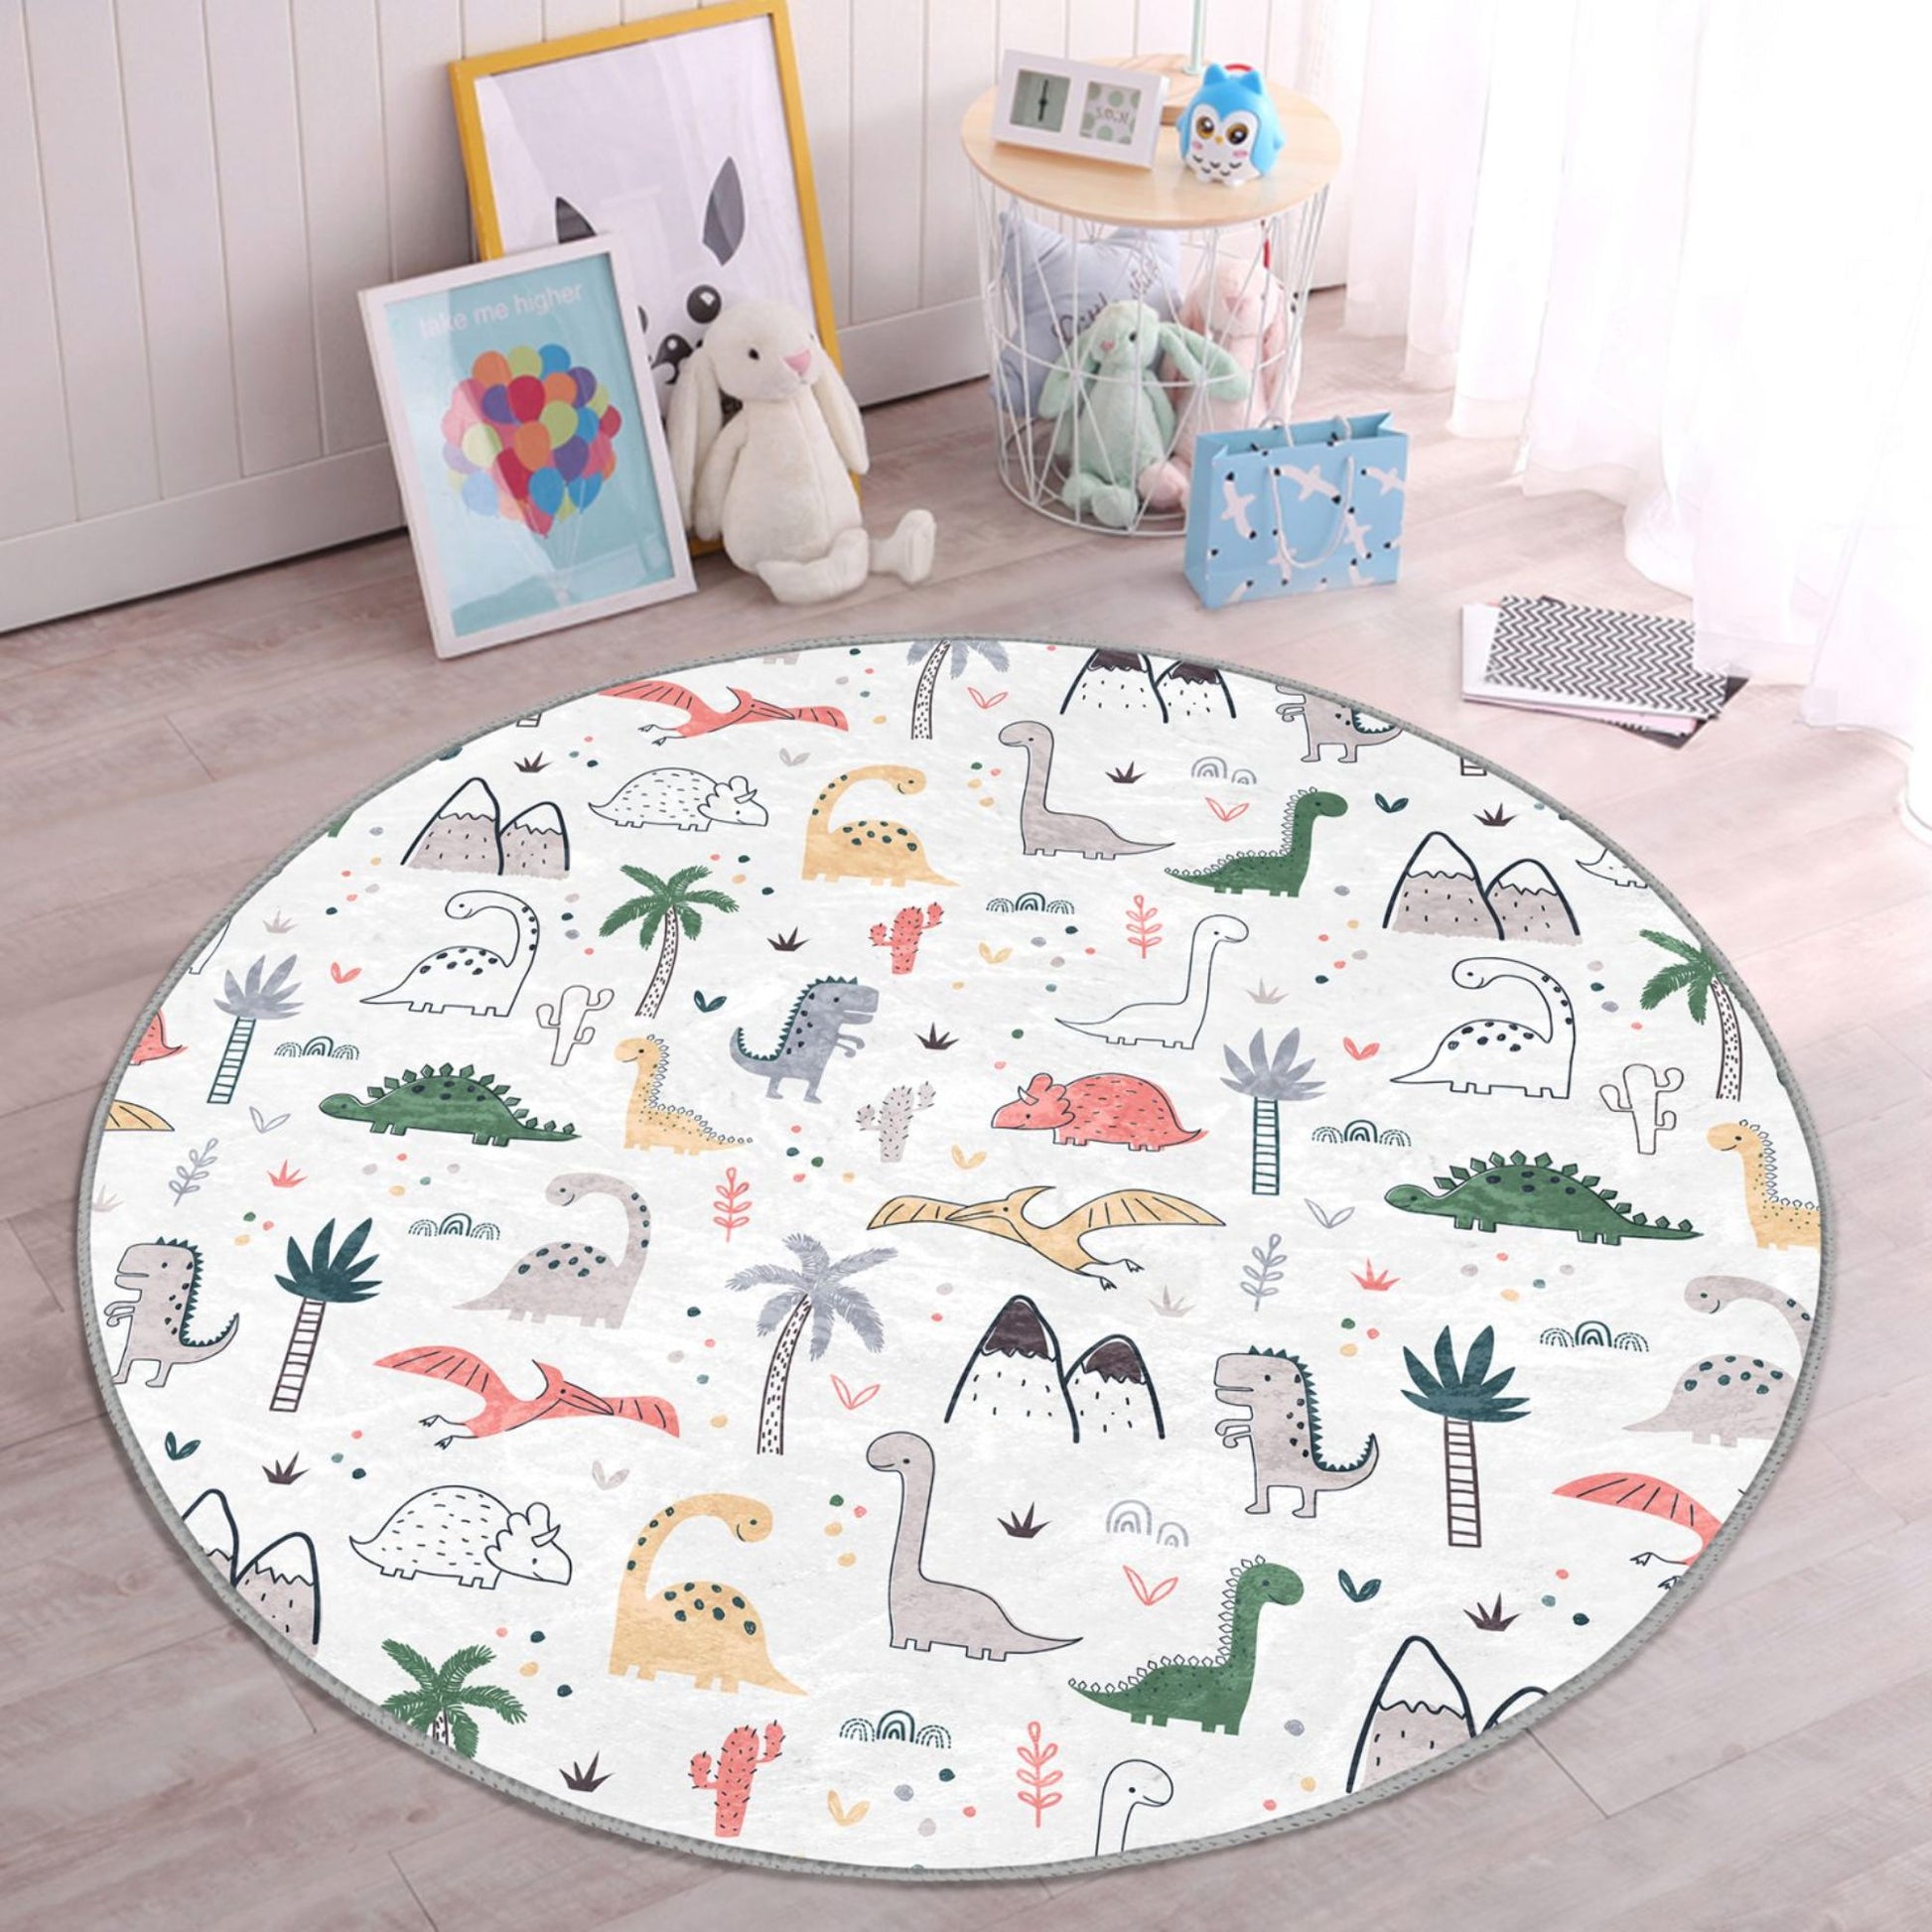 Homeezone Kids Rug - Journey to the Land of Dinosaurs